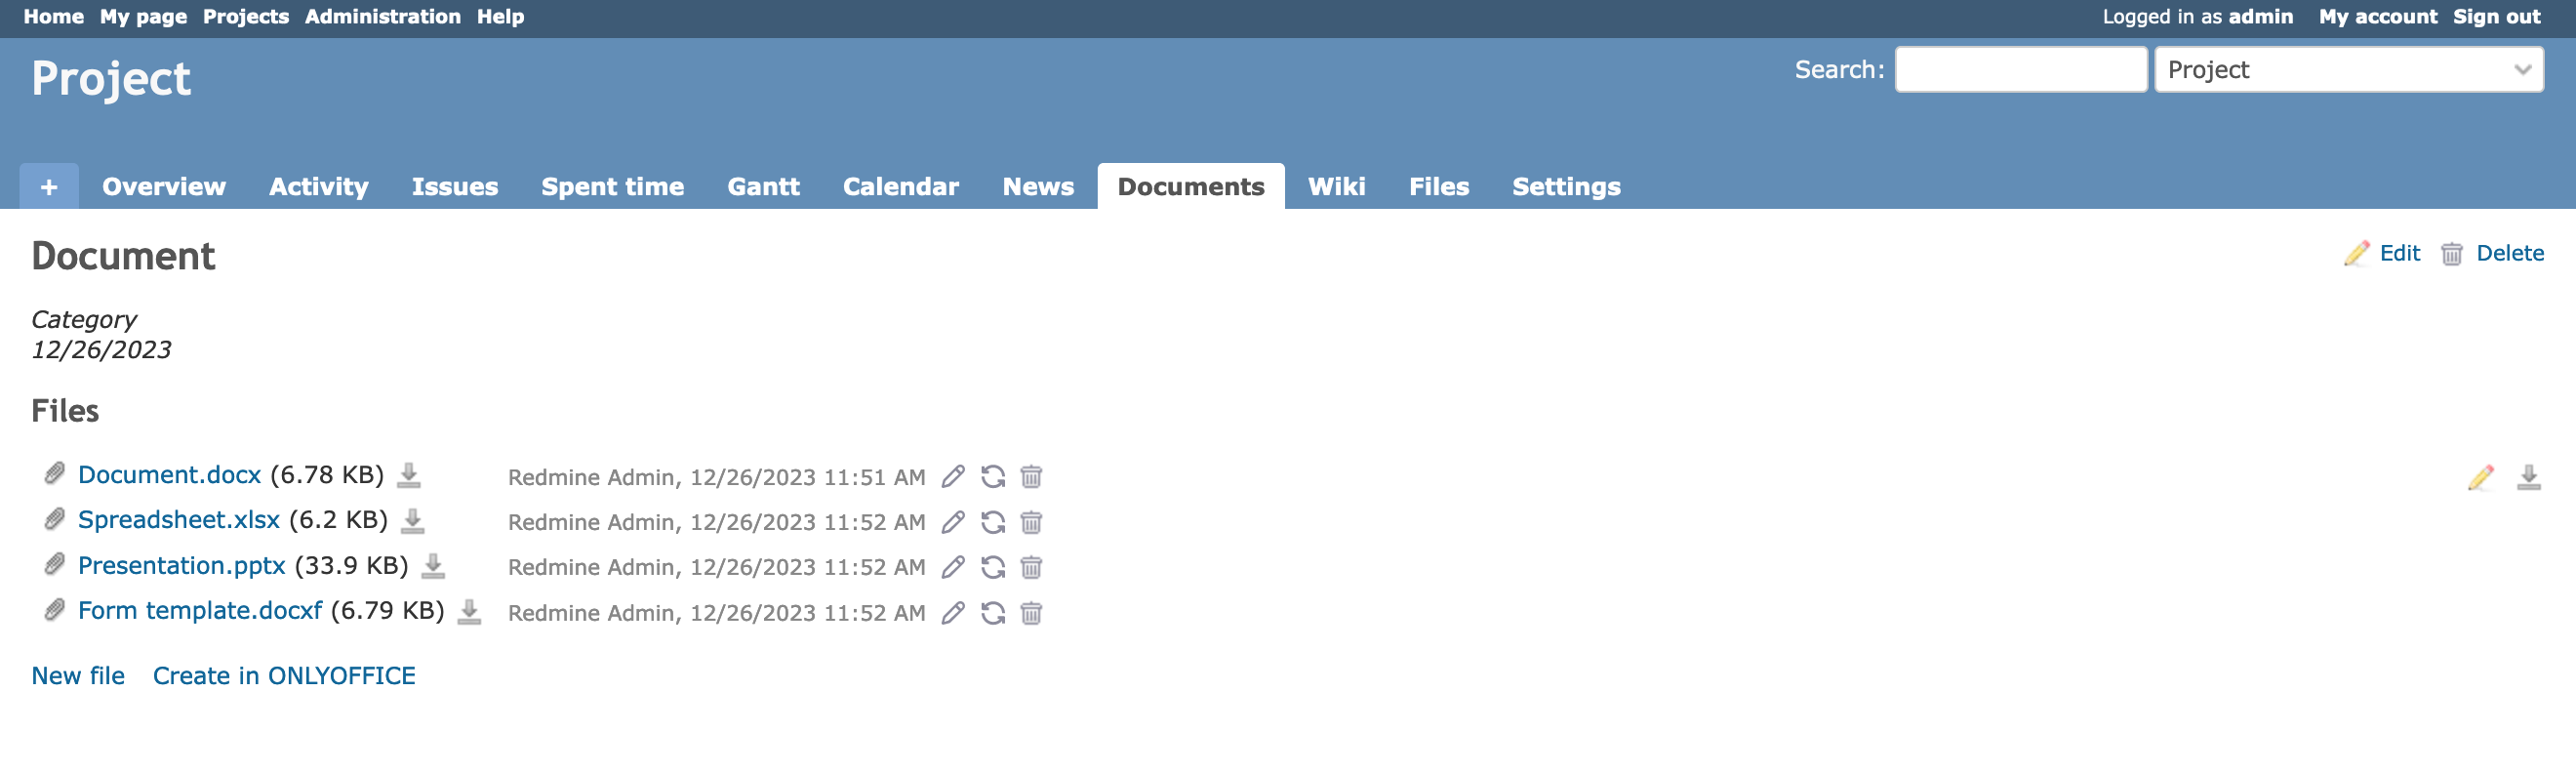 Documents page